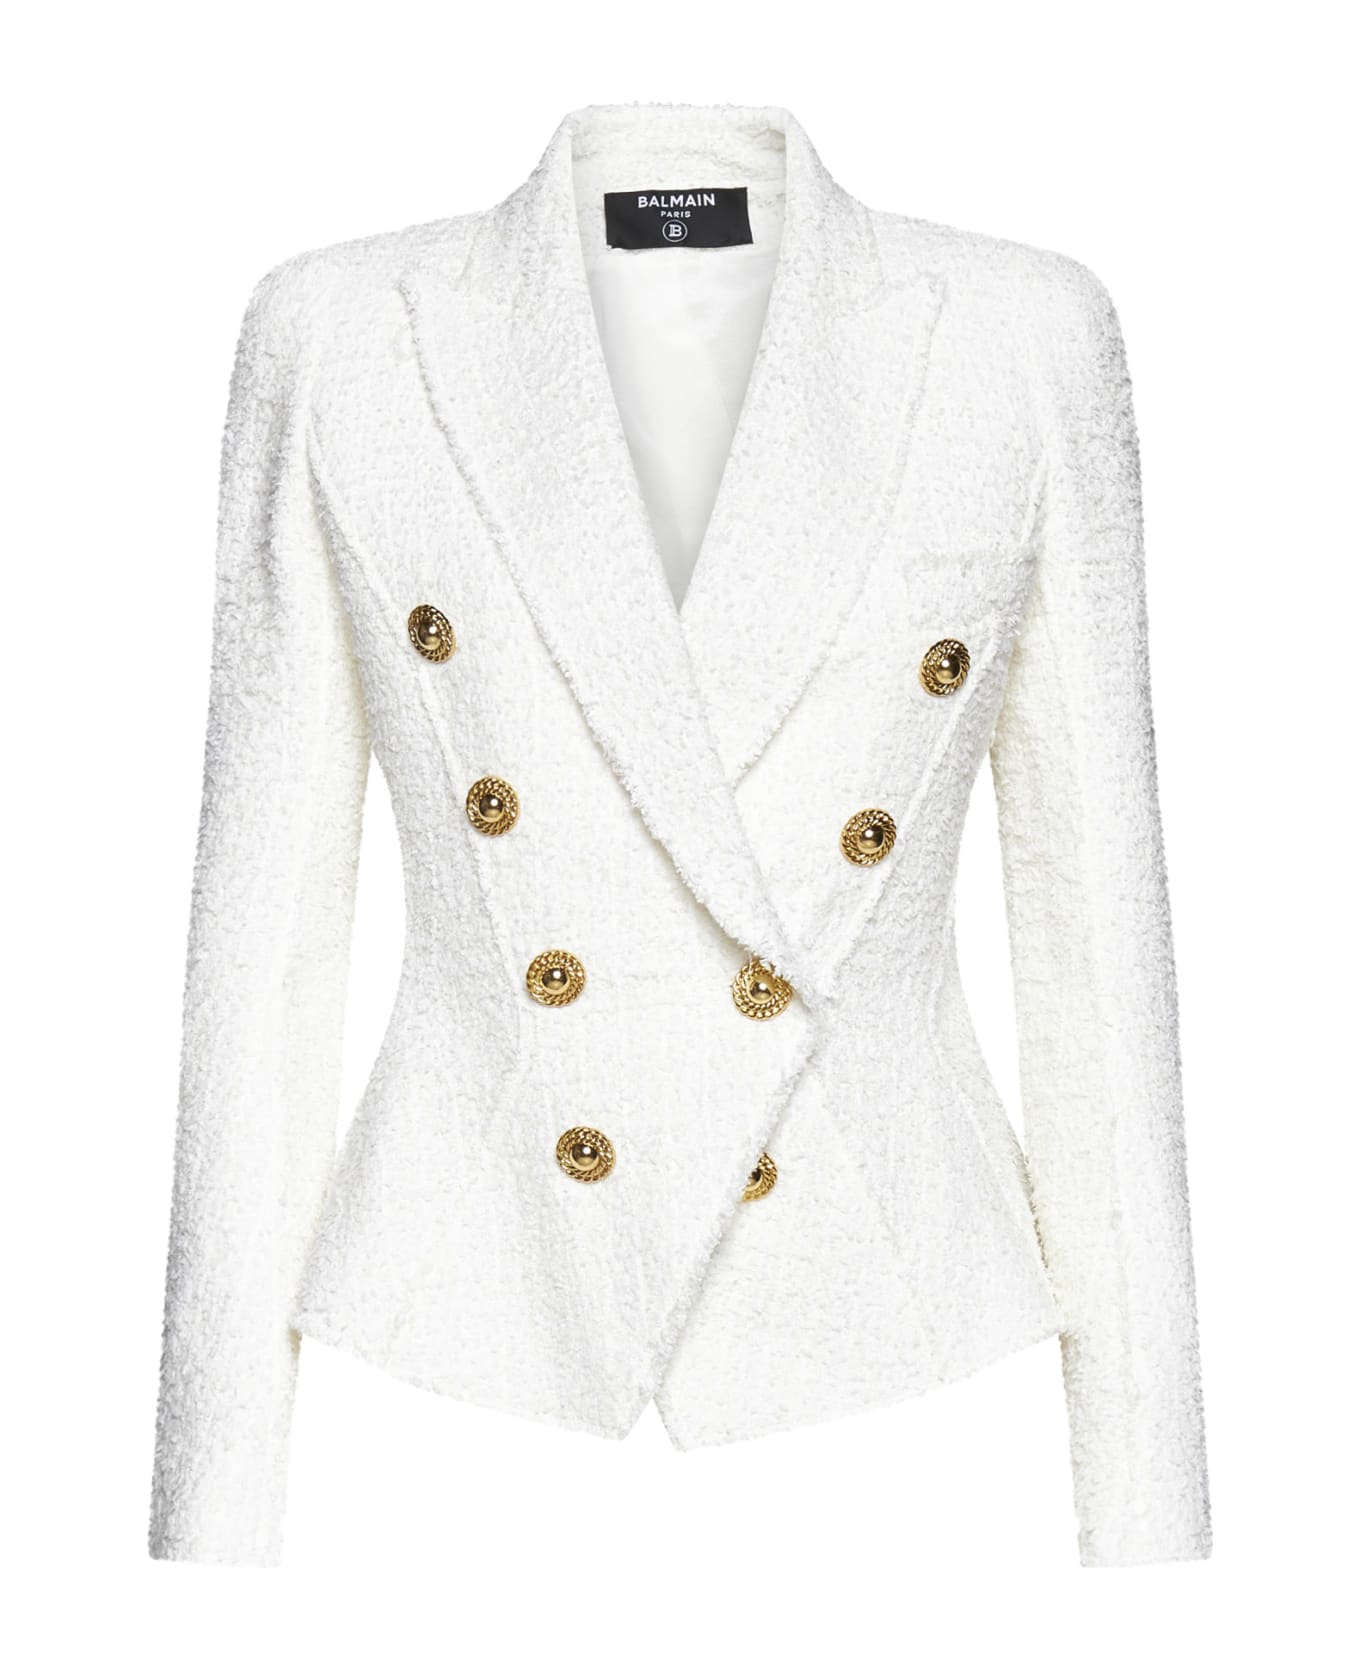 Balmain Double-breasted Tweed Blazer With Logo Buttons - Blanc ブレザー